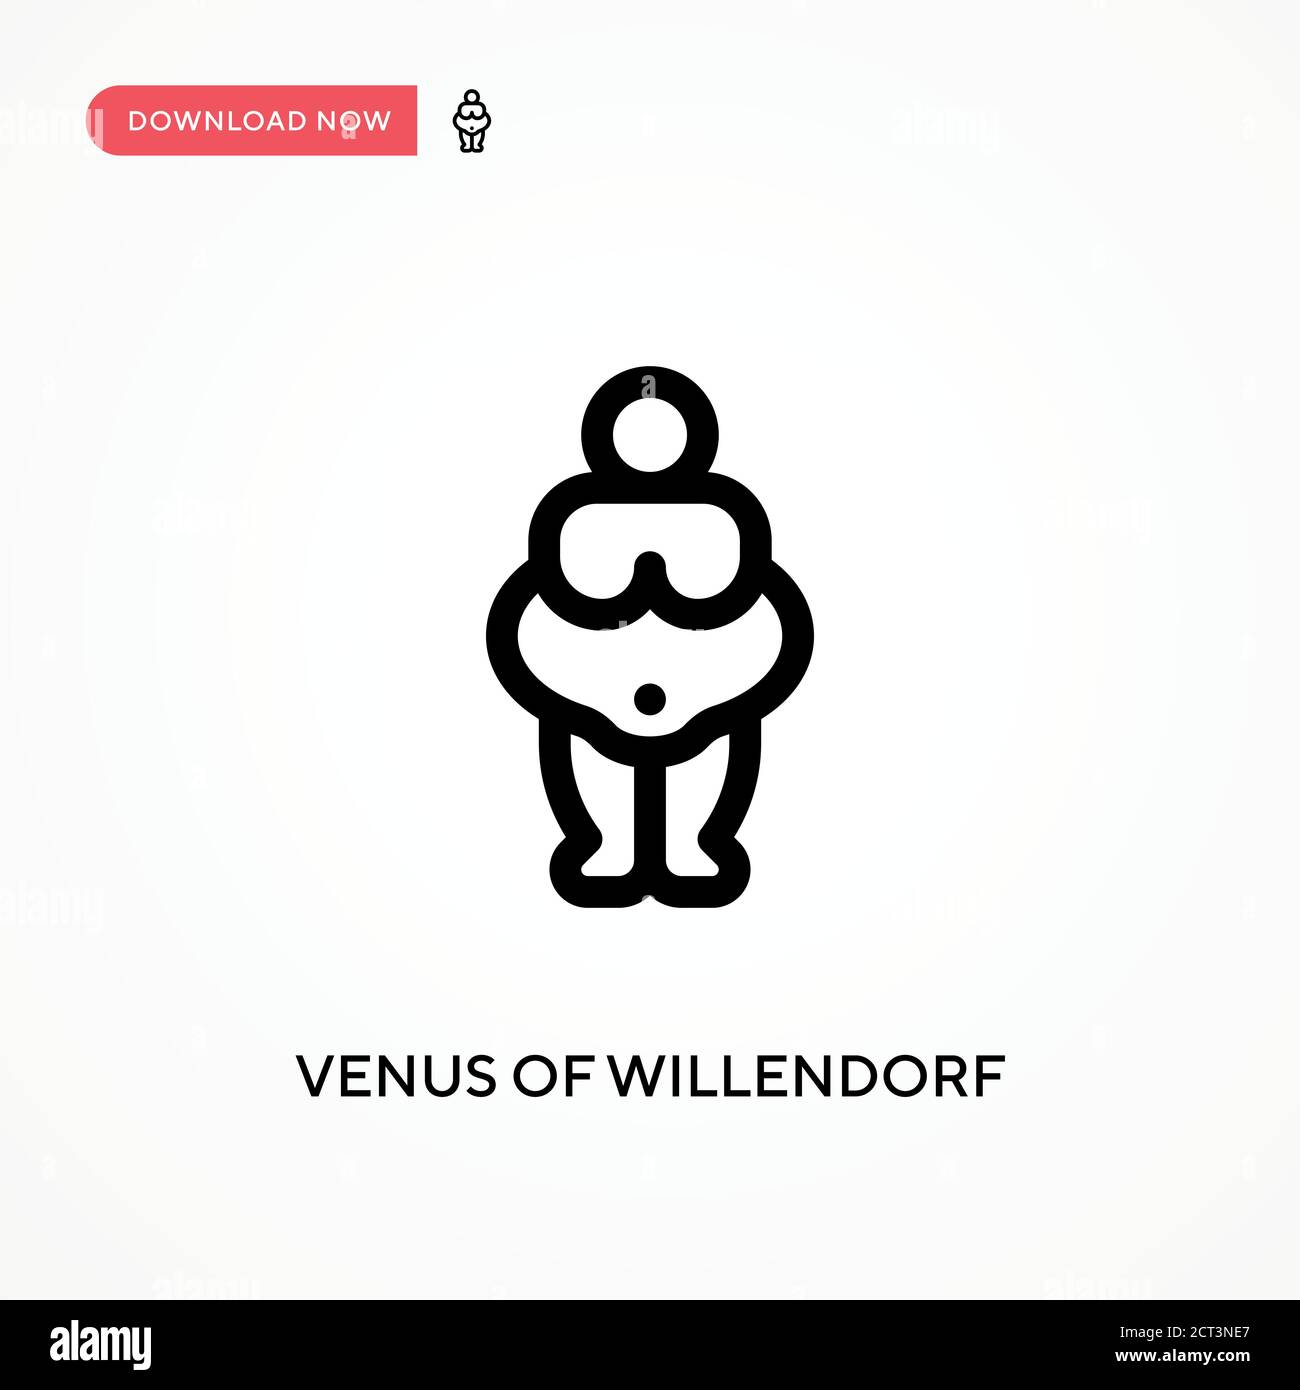 Venus of willendorf Simple vector icon. Modern, simple flat vector illustration for web site or mobile app Stock Vector